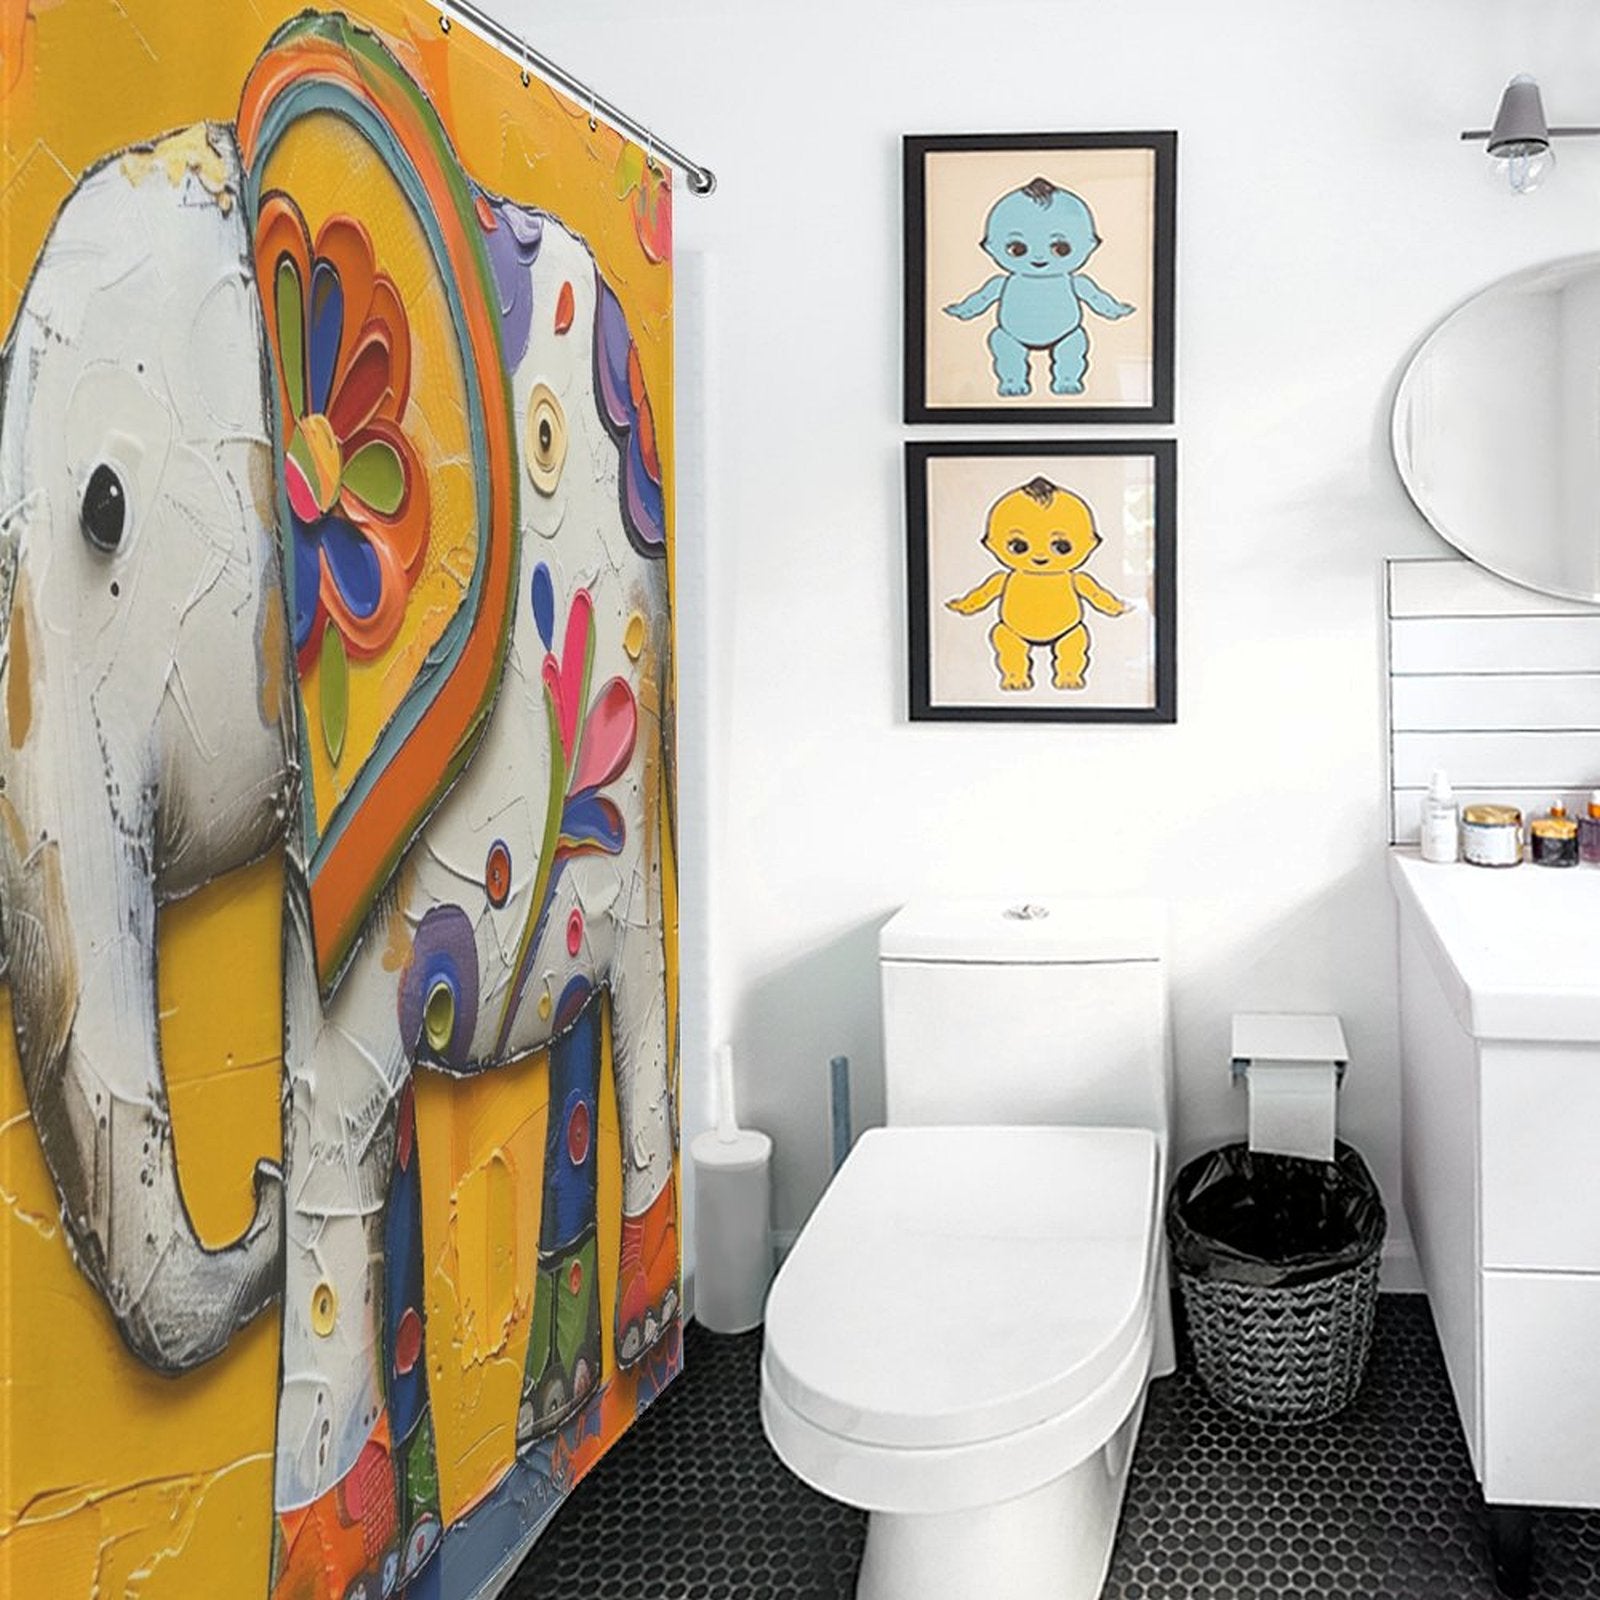 Bathroom with a vibrant Cute Baby Elephant Shower Curtain-Cottoncat and two framed baby animal prints on the wall. White toilet and sink are also present, adding to the charming bathroom decor.